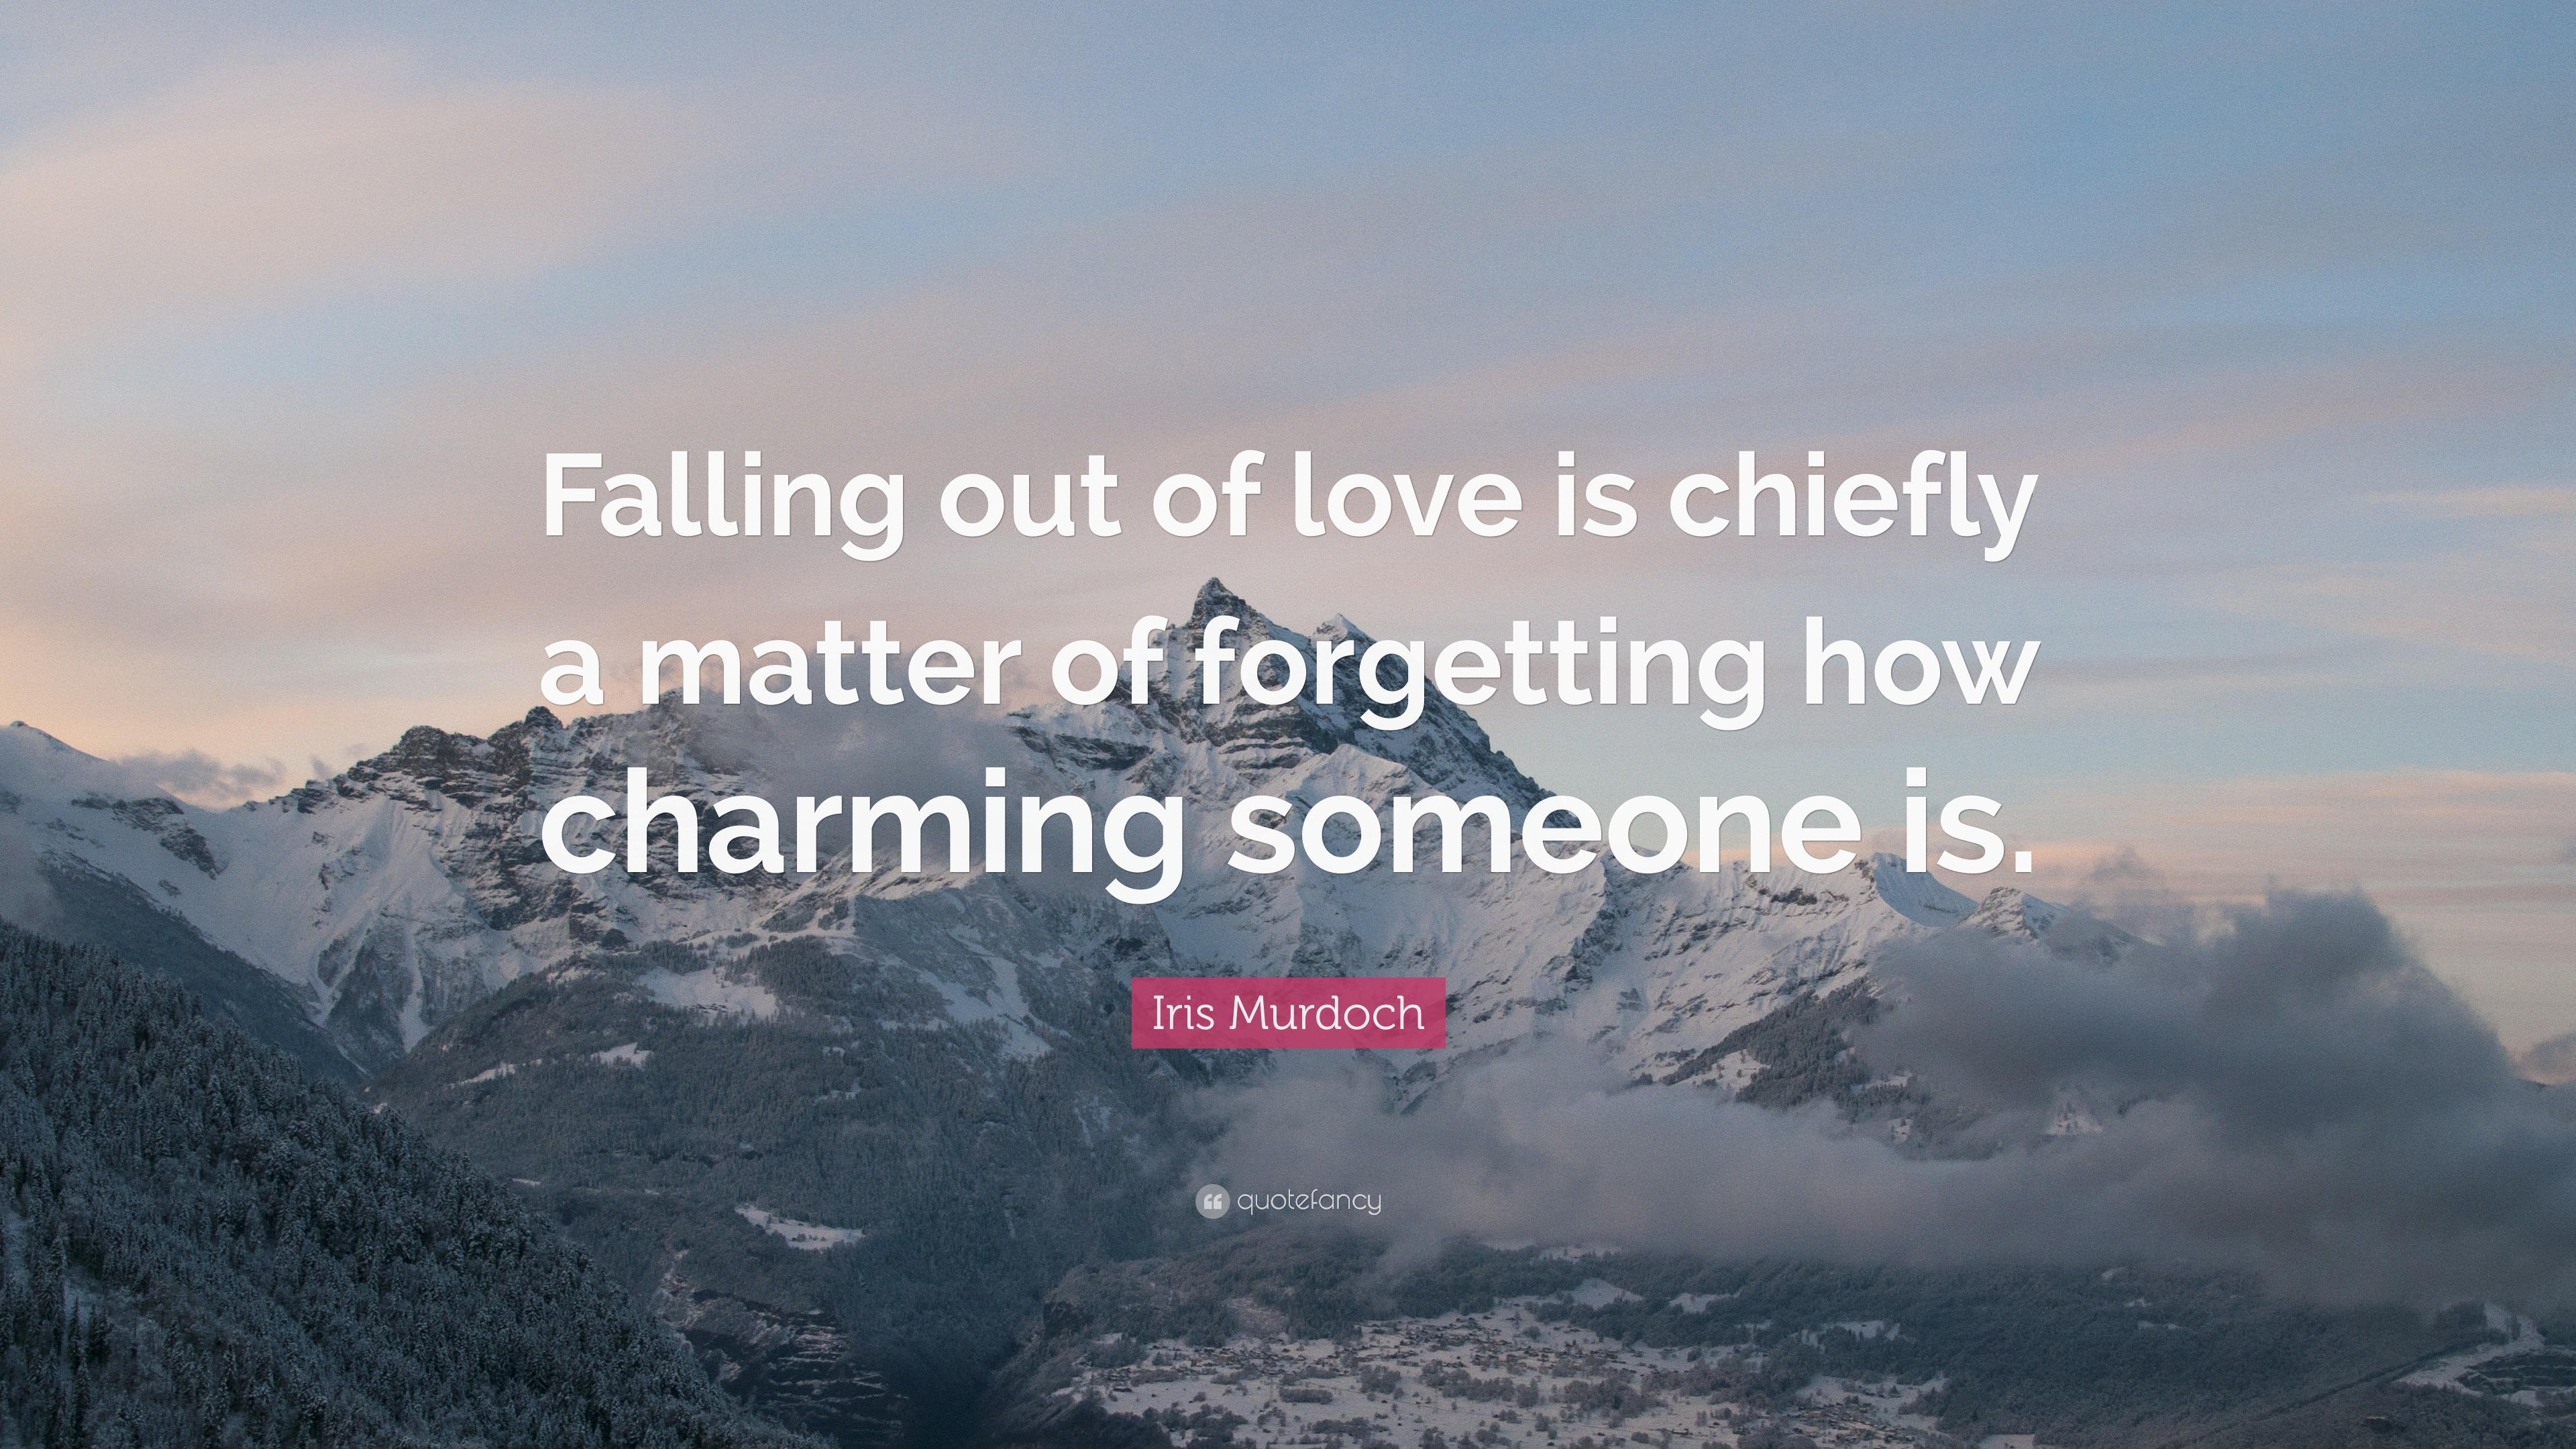 Iris Murdoch Quote: “Falling out of love is chiefly a matter of ...